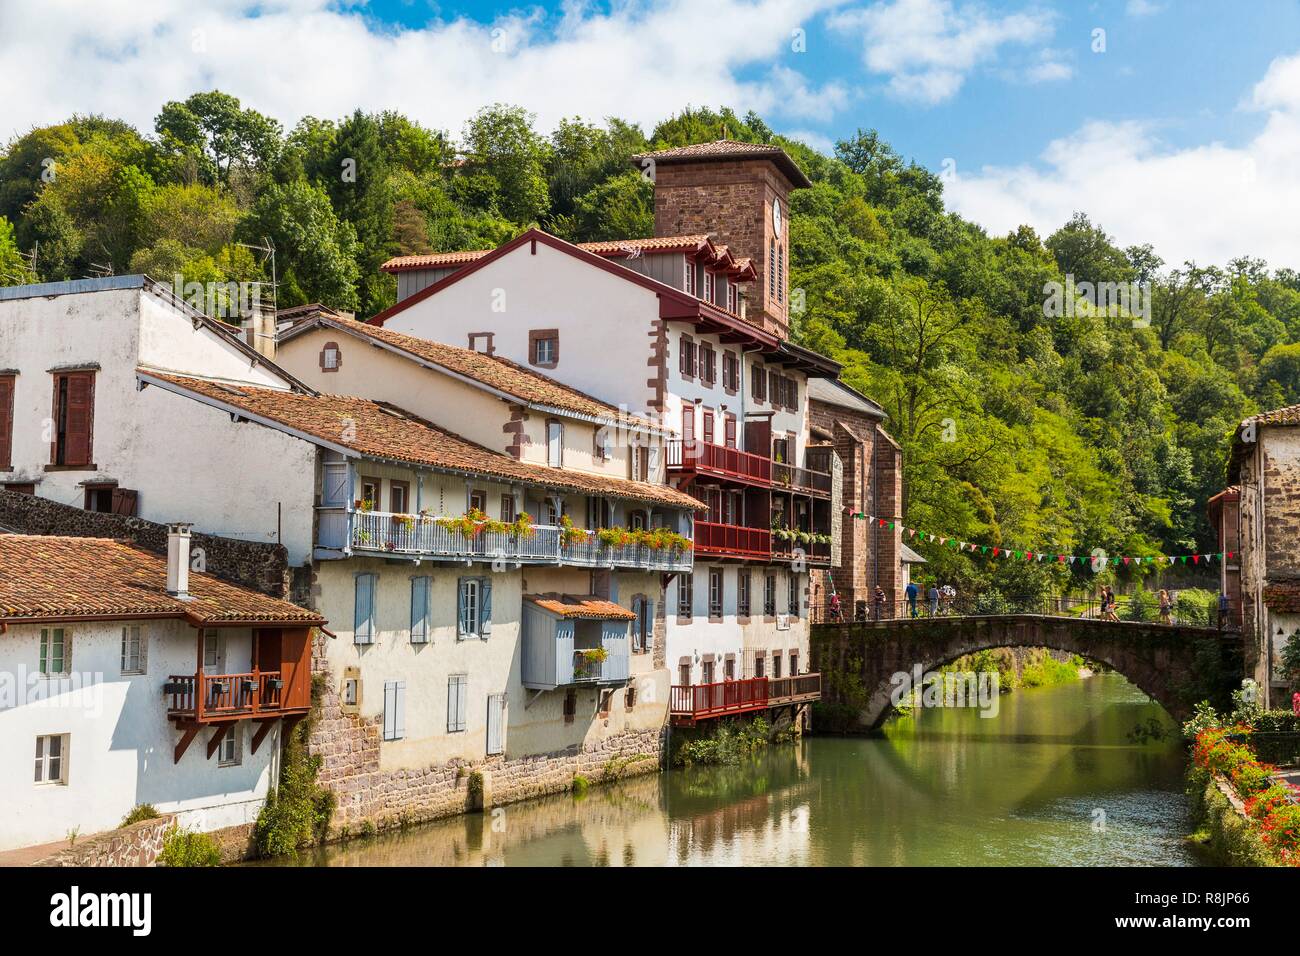 France, Pyrenees Atlantiques, Bask country, Saint Jean Pied de Port, Saint Jean Pied de Port, the Old Bridge on the Nive River of Beherobie and the Church of the Assumption or Notre Dame du Bout du Pont Stock Photo